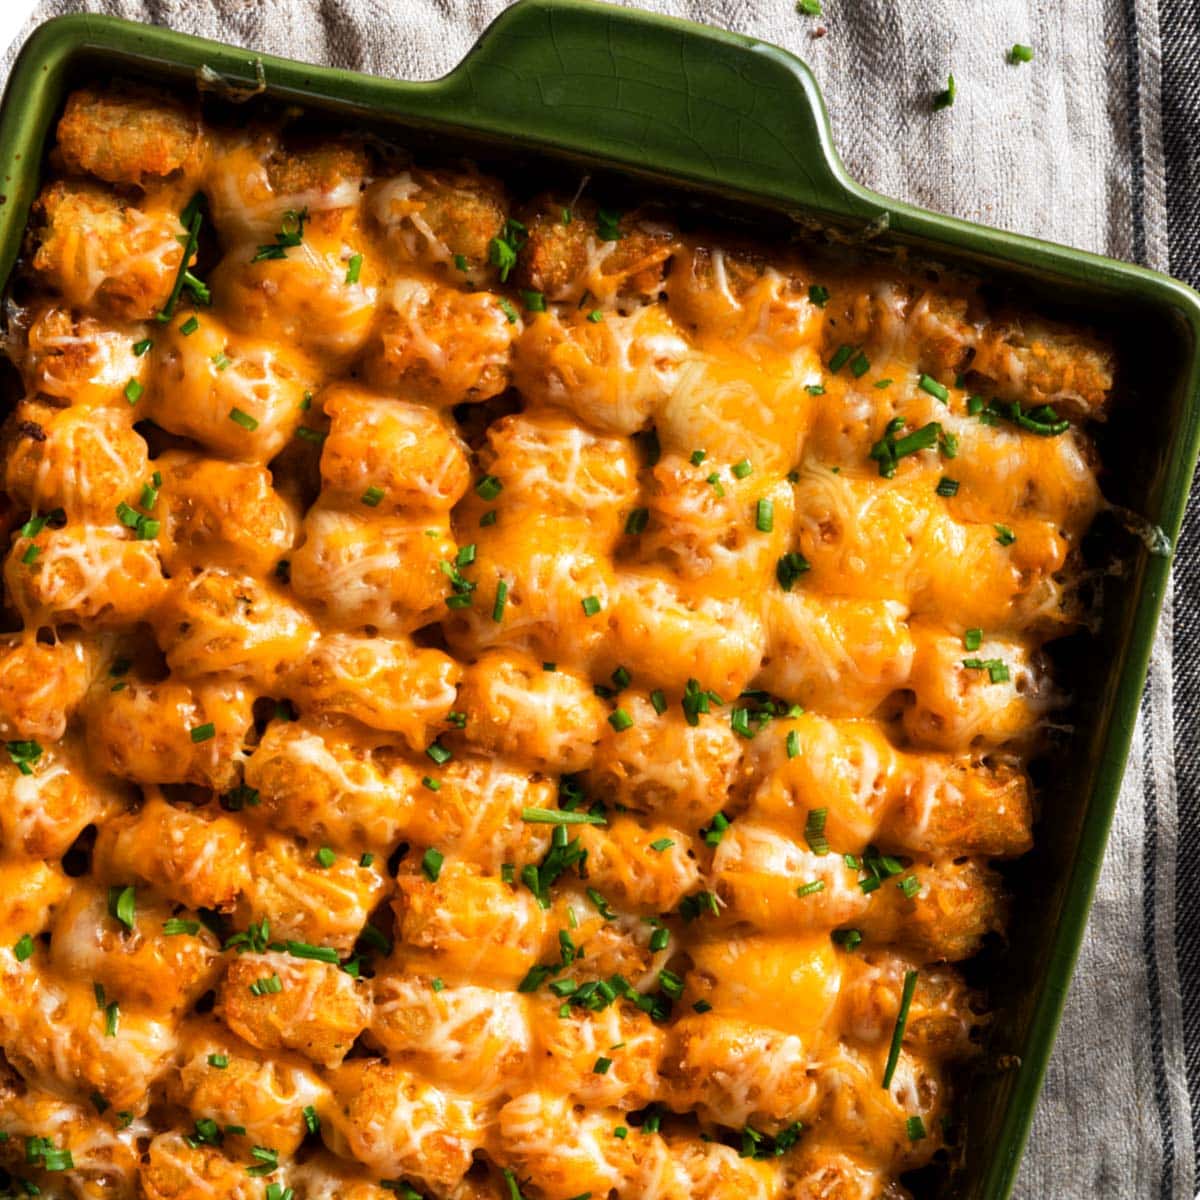 I love how easy and convenient this recipe is! The Tater Tot Casserole can be made in a single pot, making it an easy one-dish meal perfect for busy weeknights. It's also budget-friendly and can be customized with different meats, vegetables, and cheeses to suit your preferences.